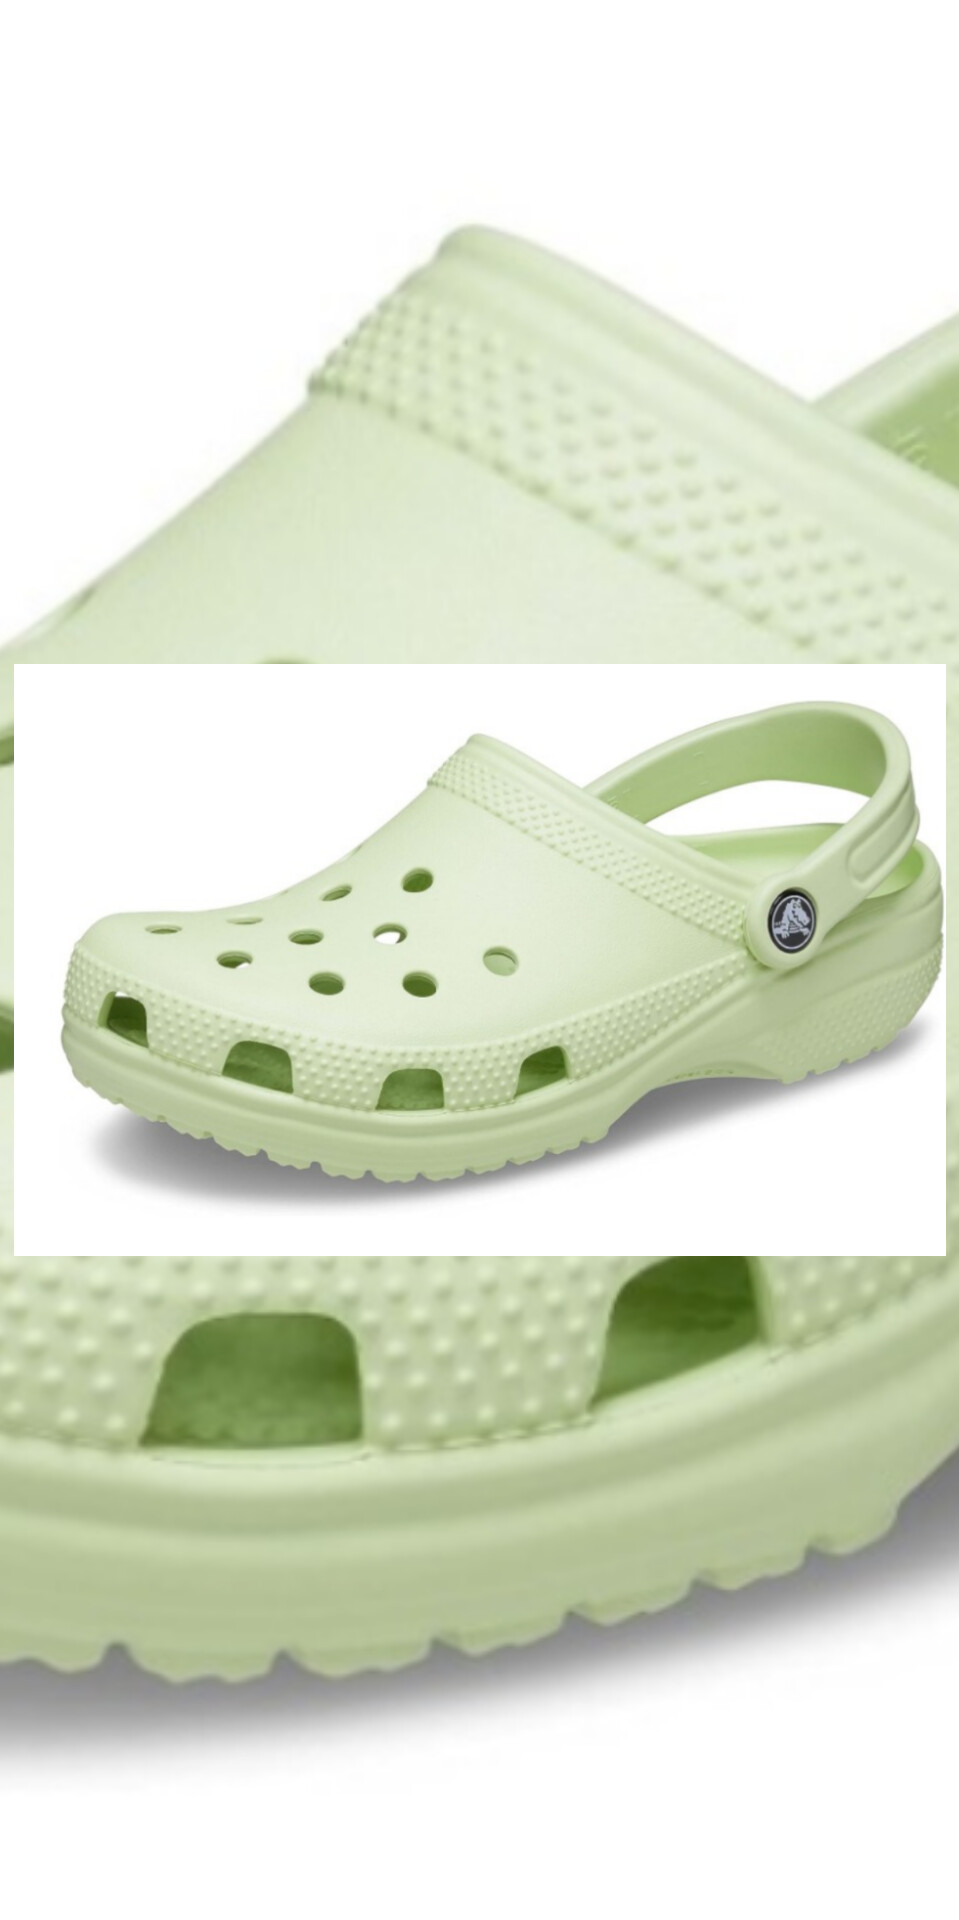 Crocs For Men: The Go-To Footwear For Travel And Adventure | Cosmochics | Best Blogs For Fashion, Beauty, Lifestyle And Parenting